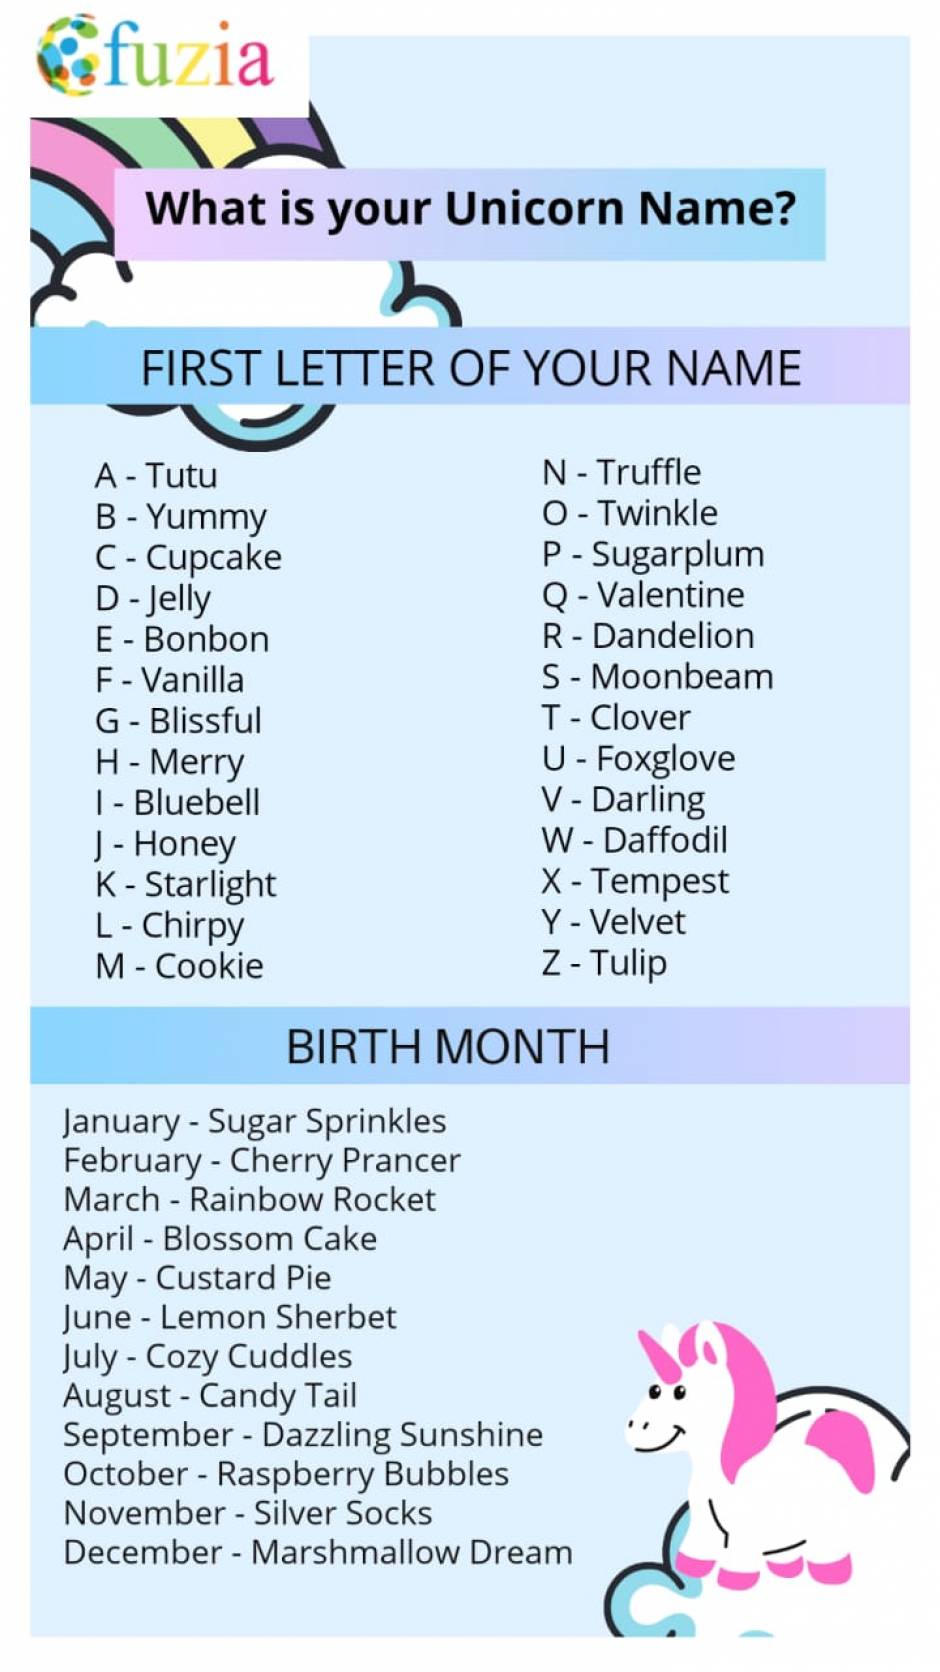 What is your Unicorn Name?